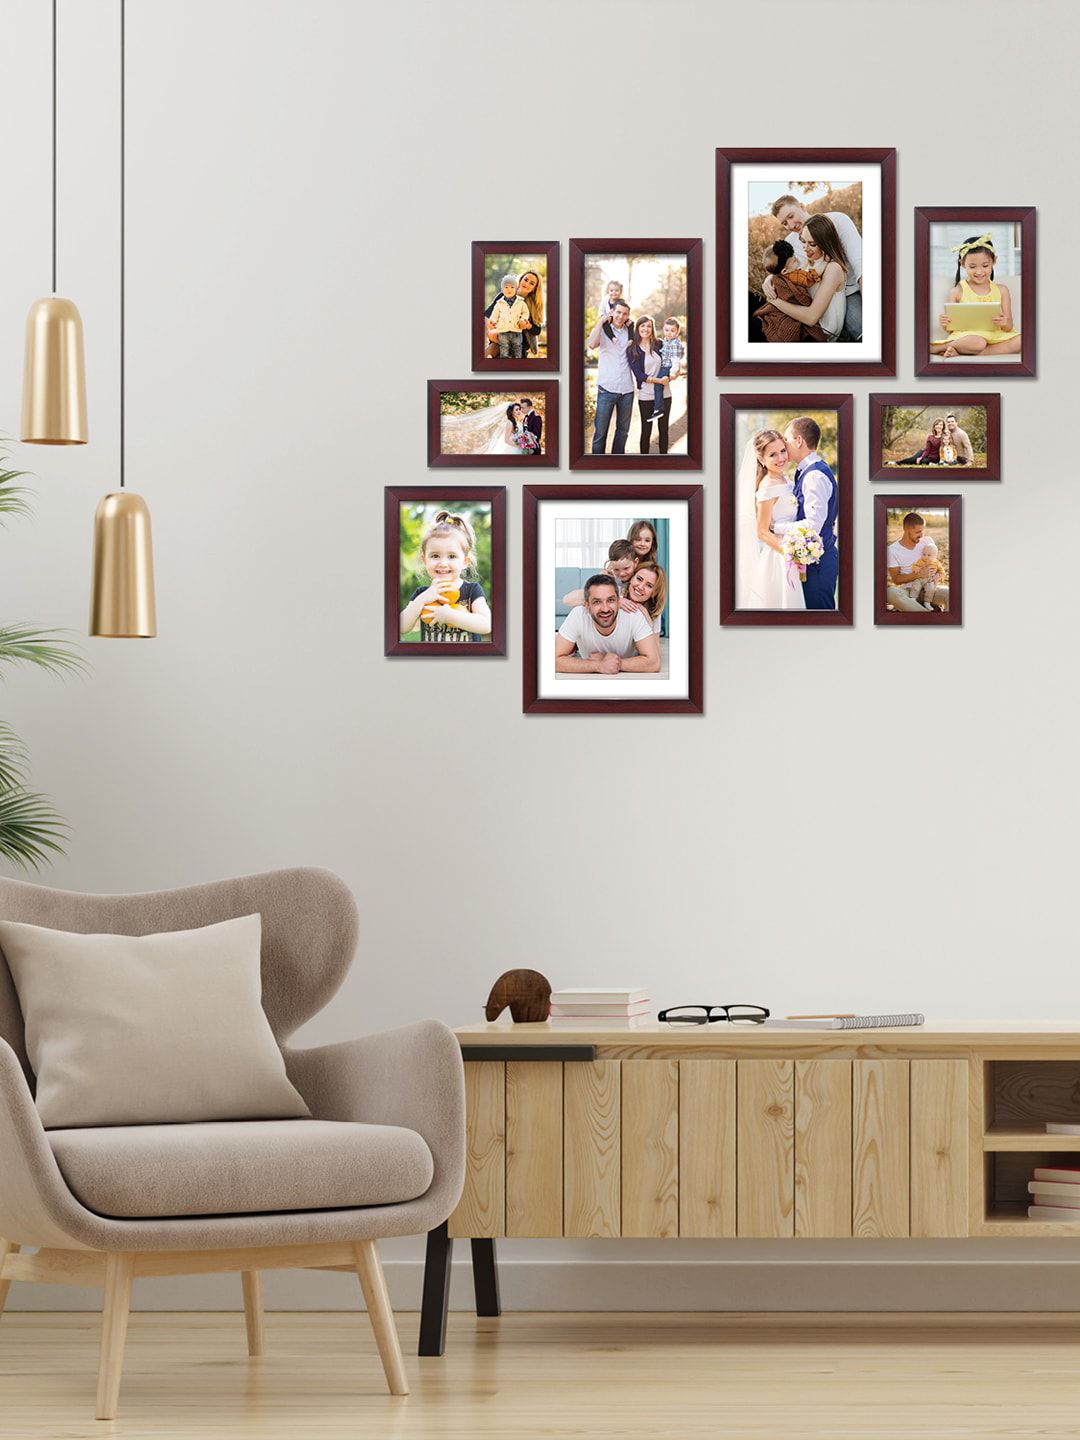 RANDOM Set Of 10 Brown & White Wooden Photo Frames Price in India